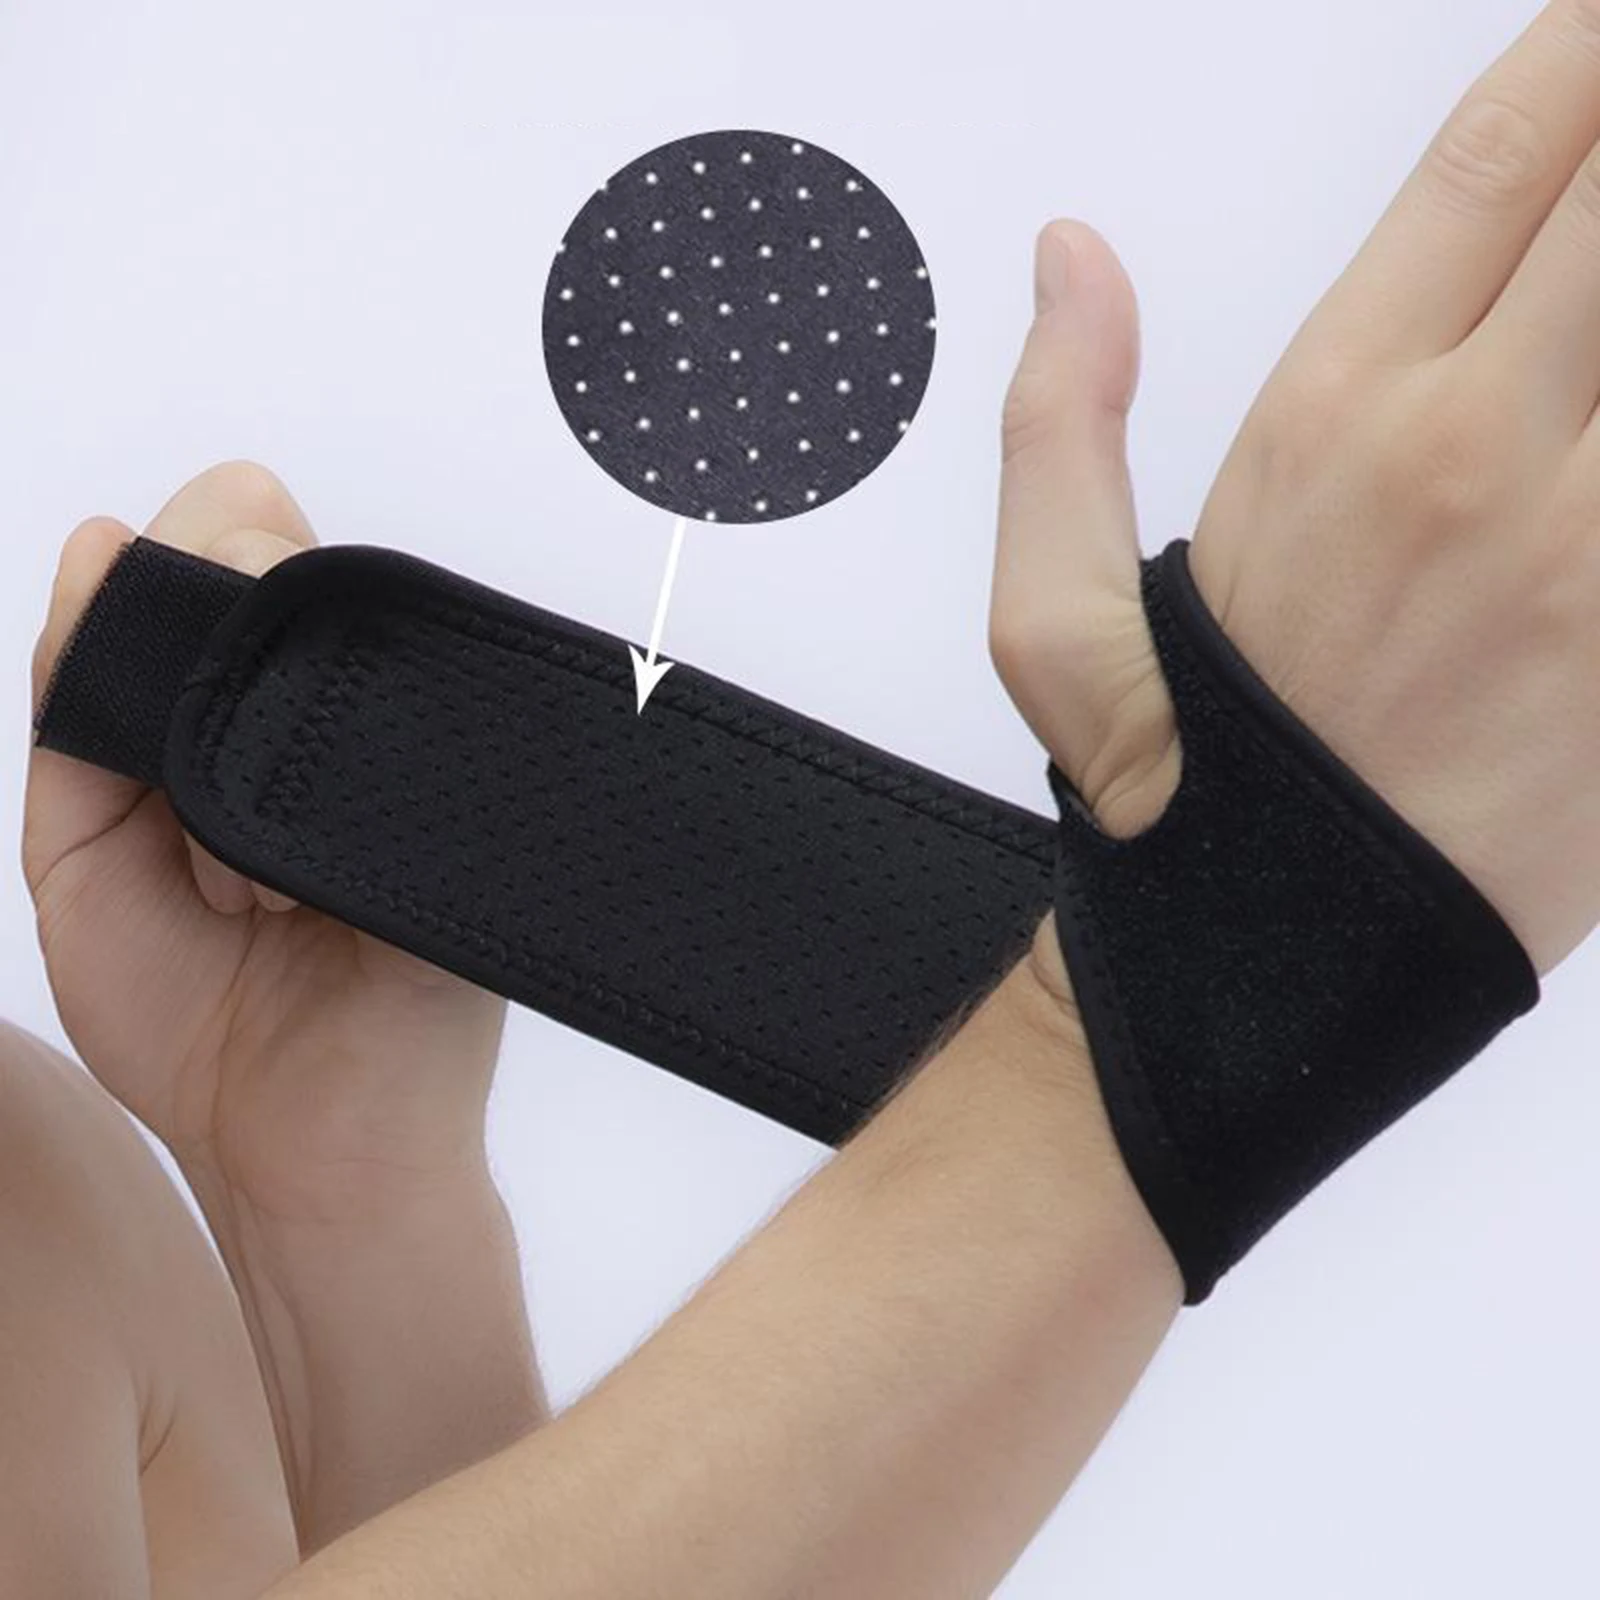 Premium Lined Wrist Support Wrist Strap Carpal Tunnel Wrist Brace Fits Both Hands Wrist Support Brace Injury Recovery